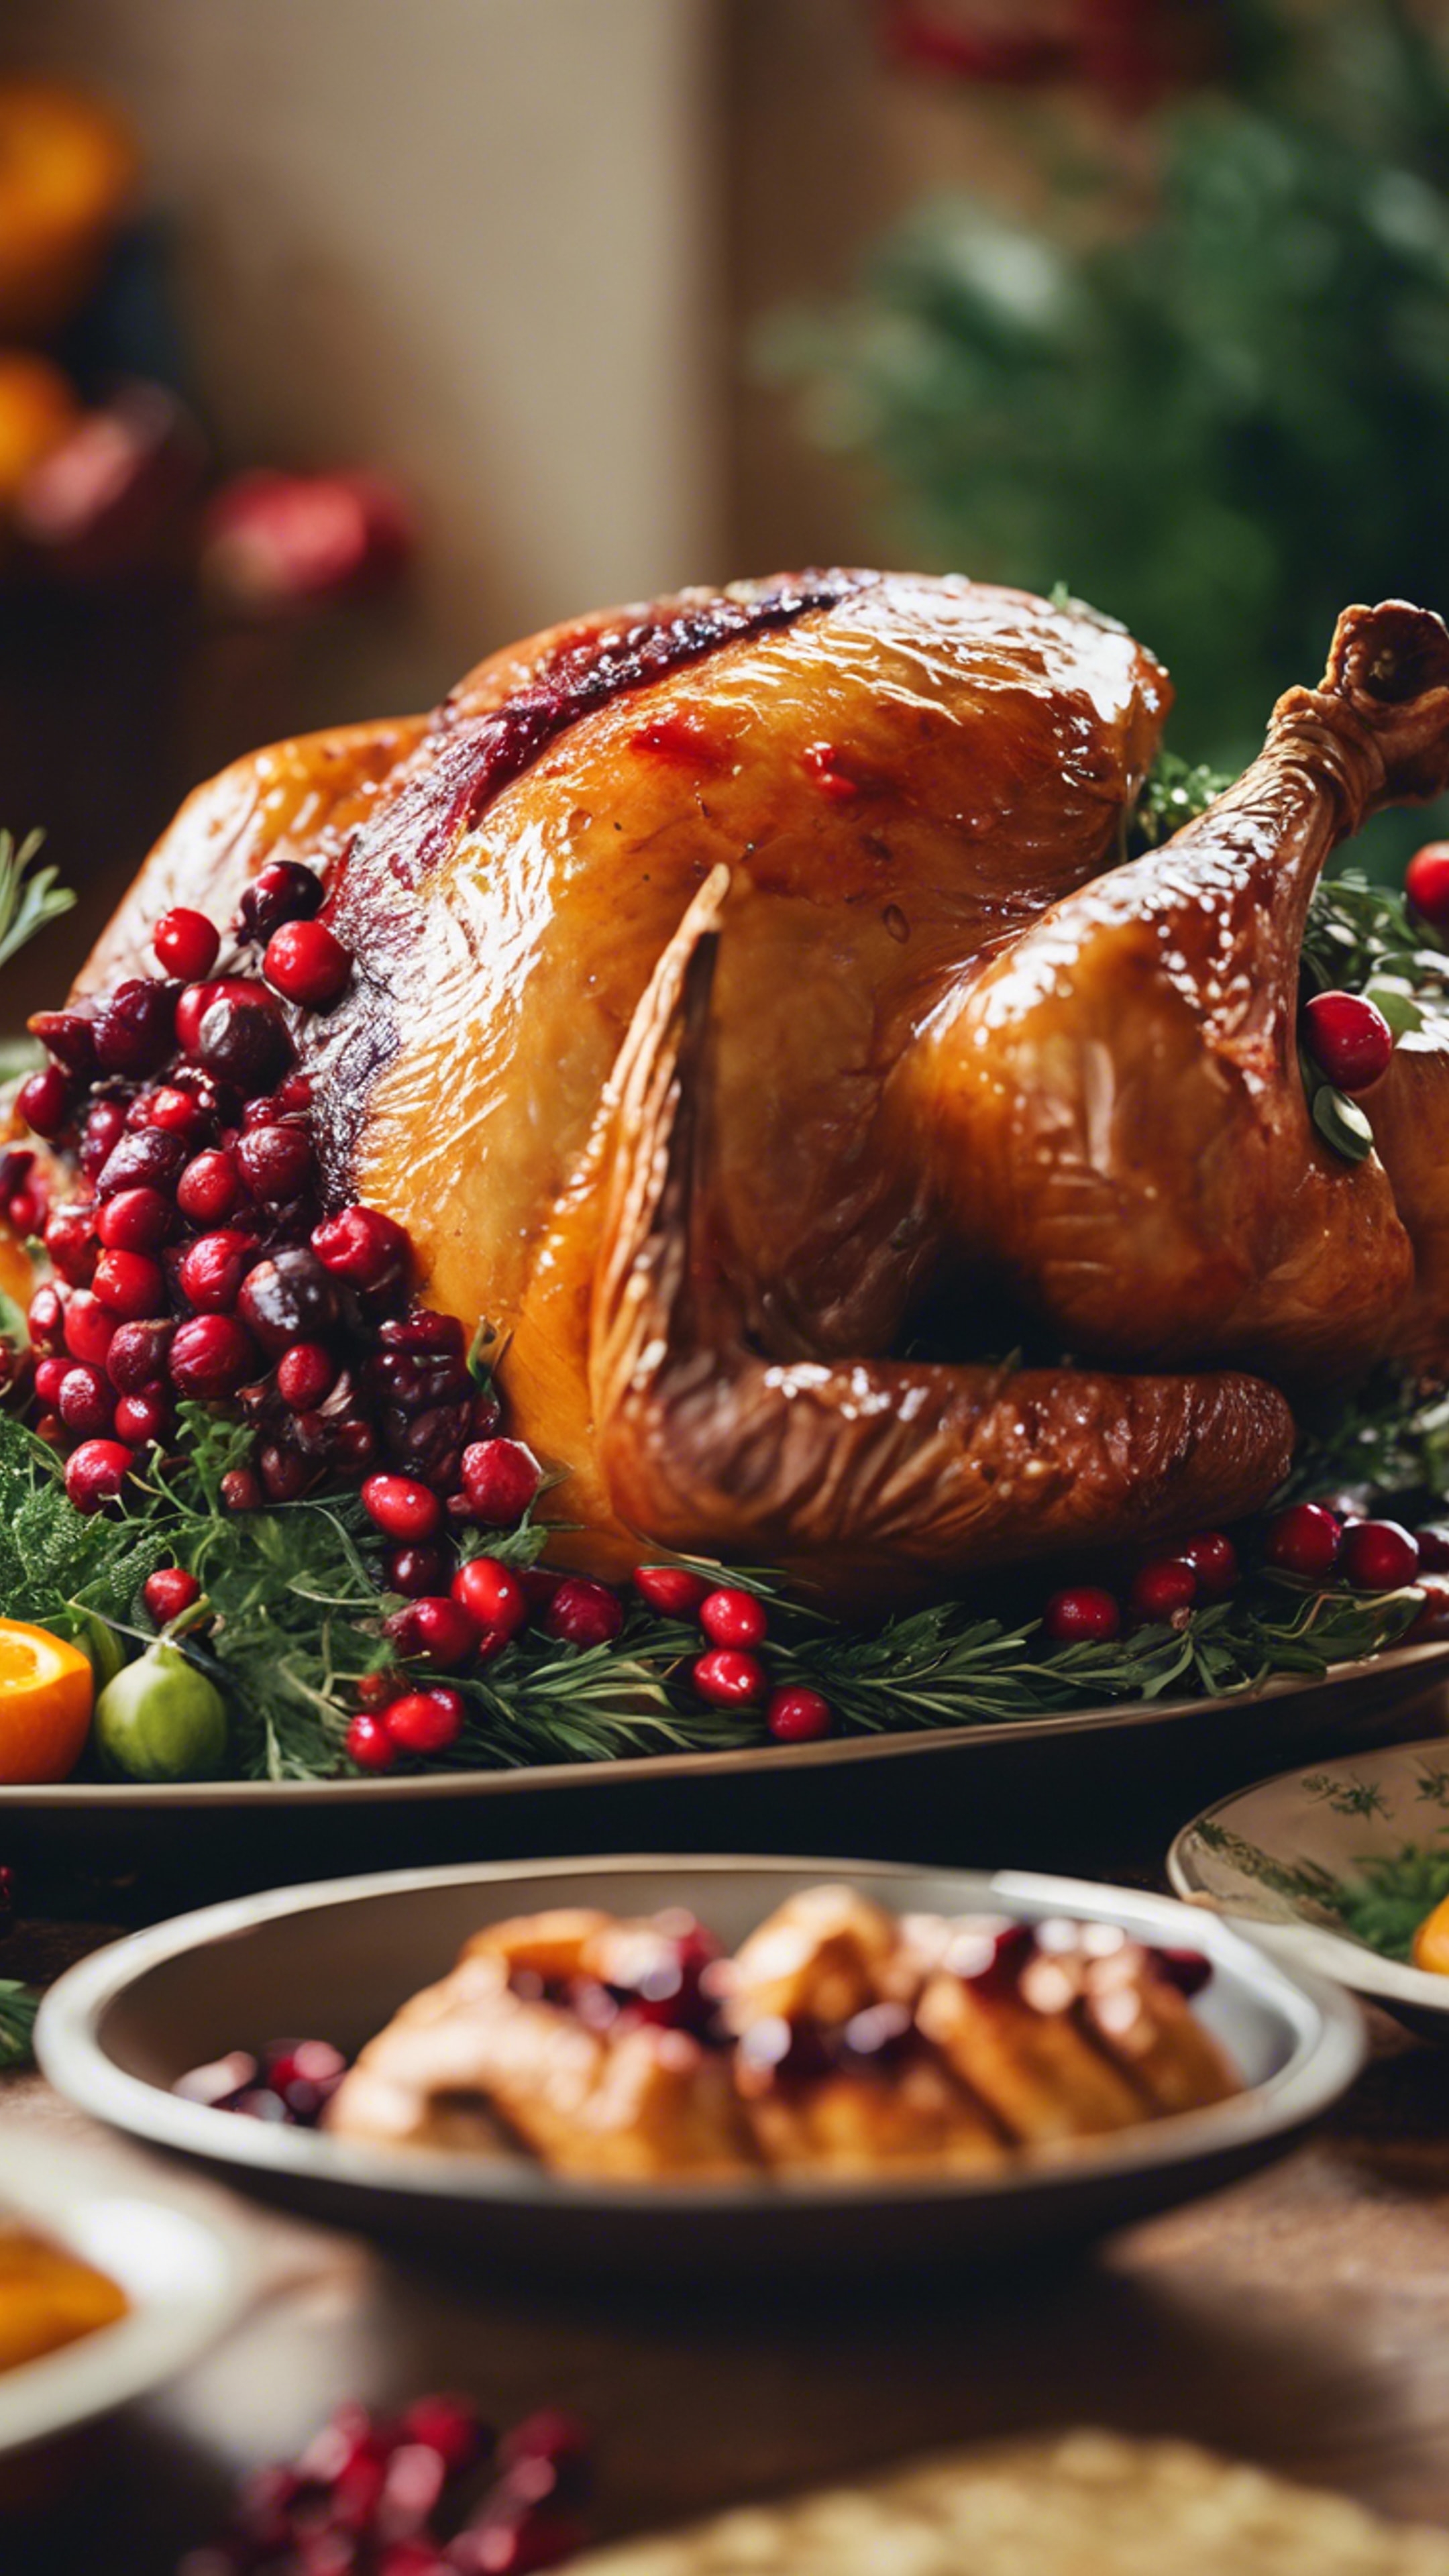 An artistic close-up of a traditional roast turkey on a Thanksgiving table, garnished with cranberries and herbs. Hintergrund[f7ada081b7d5471b890d]